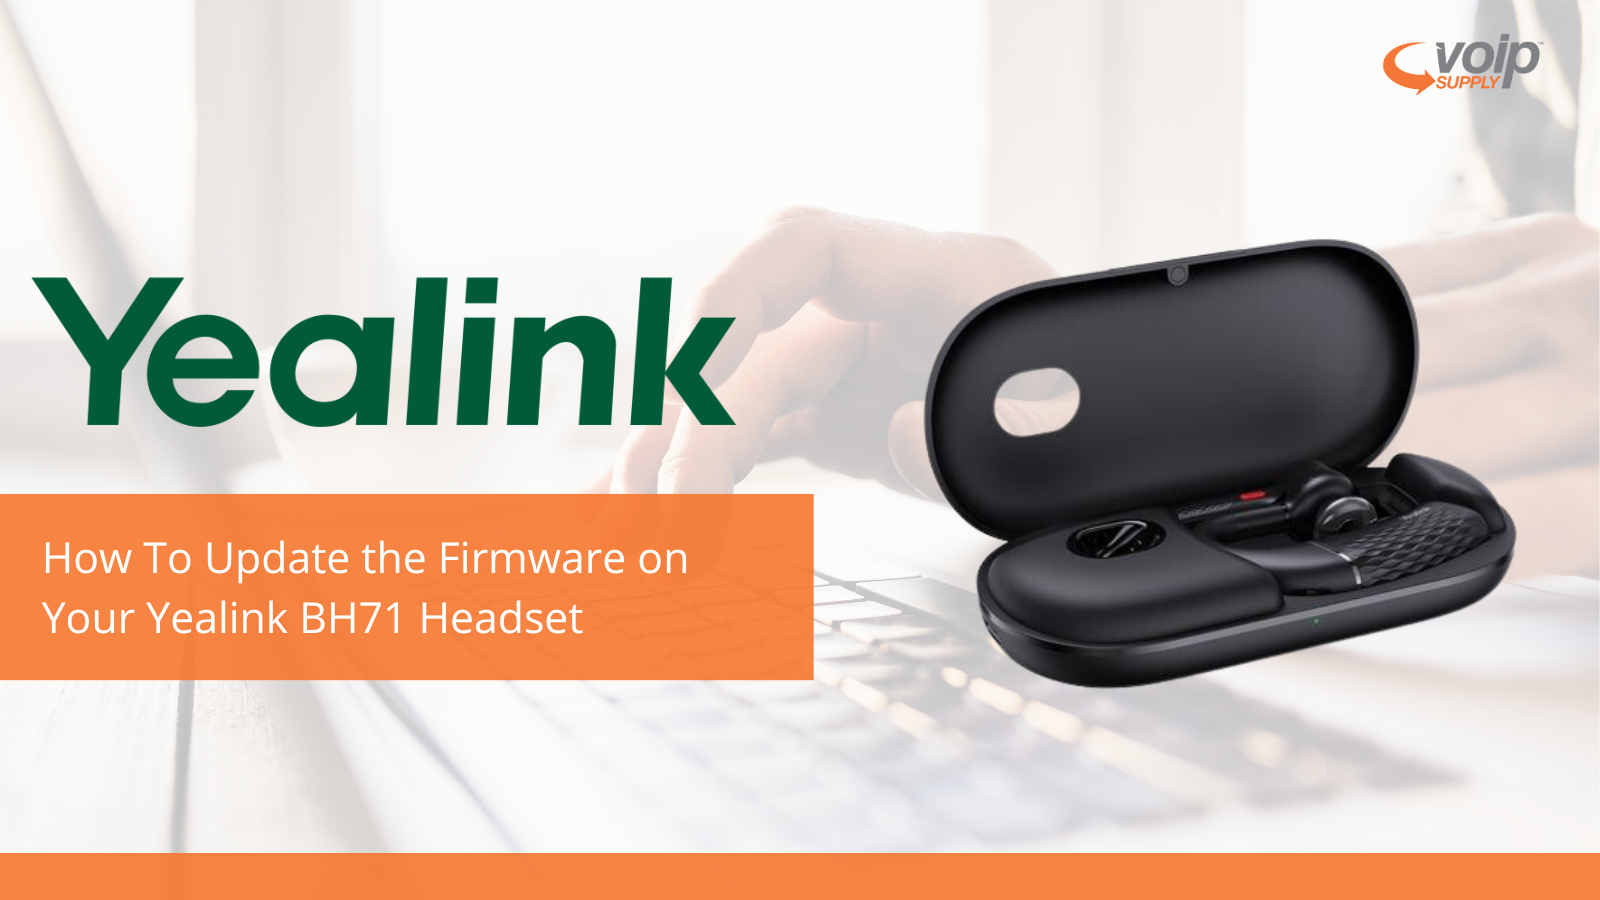 How To: Update the Firmware on Your Yealink Headset - VoIP Insider